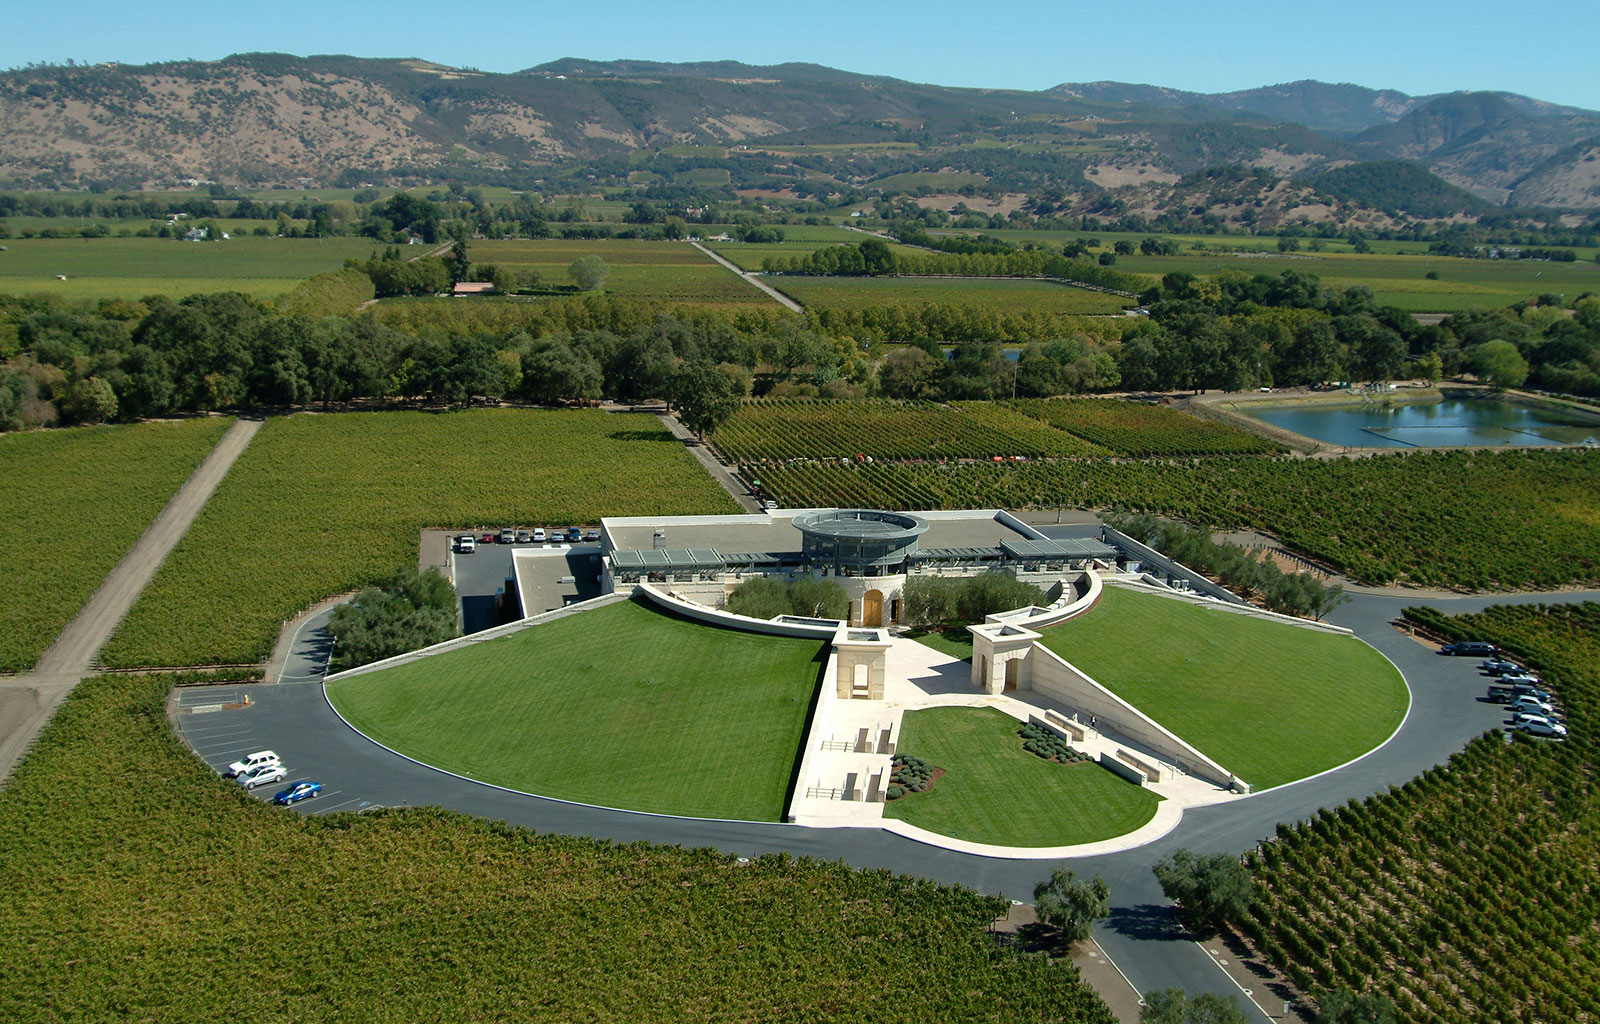 opus one winery tour napa valley